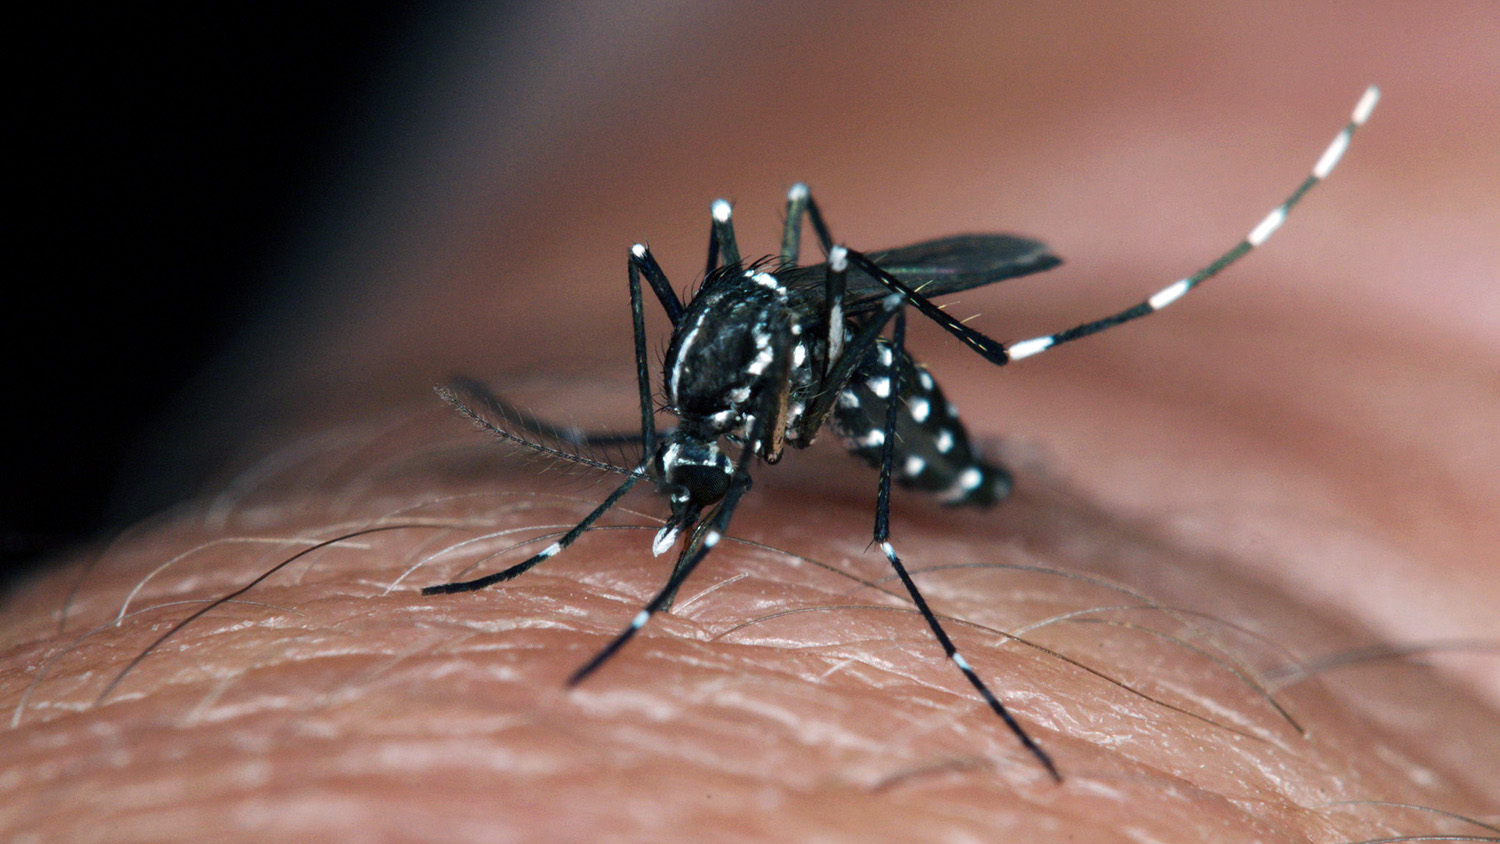 A tiger mosquito on human skin. Photo credit: Armed Forces Pest Management Board